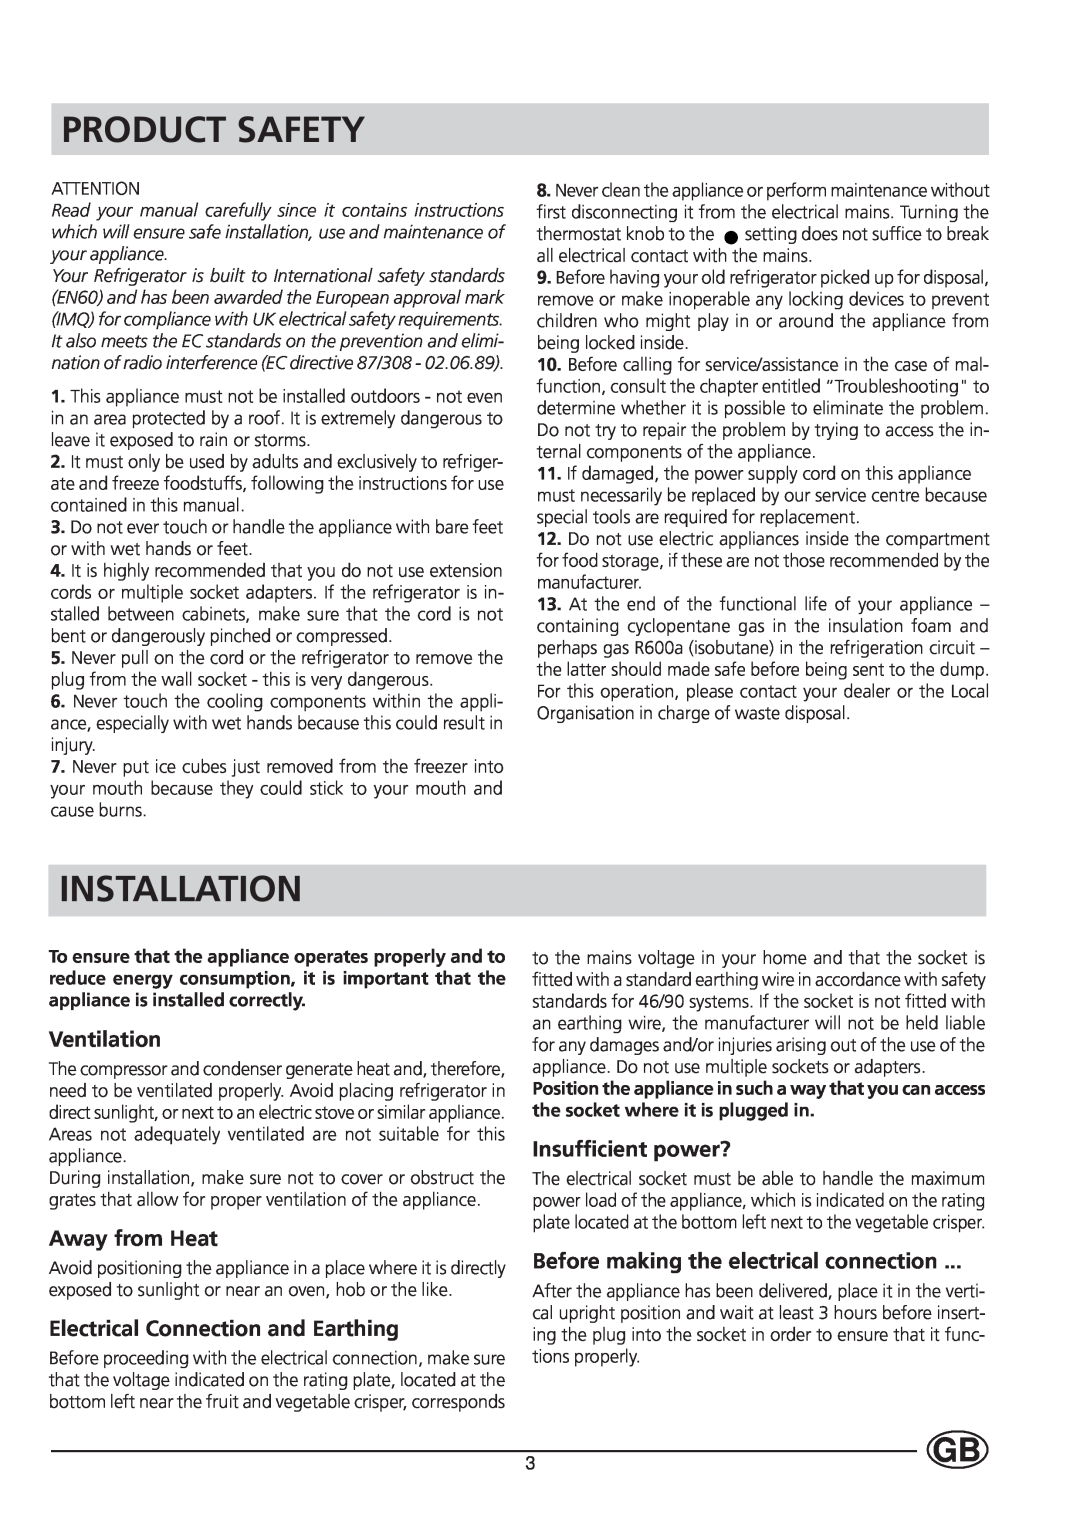 Hotpoint HUL161I manual Product Safety, Installation, Ventilation, Away from Heat, Electrical Connection and Earthing 